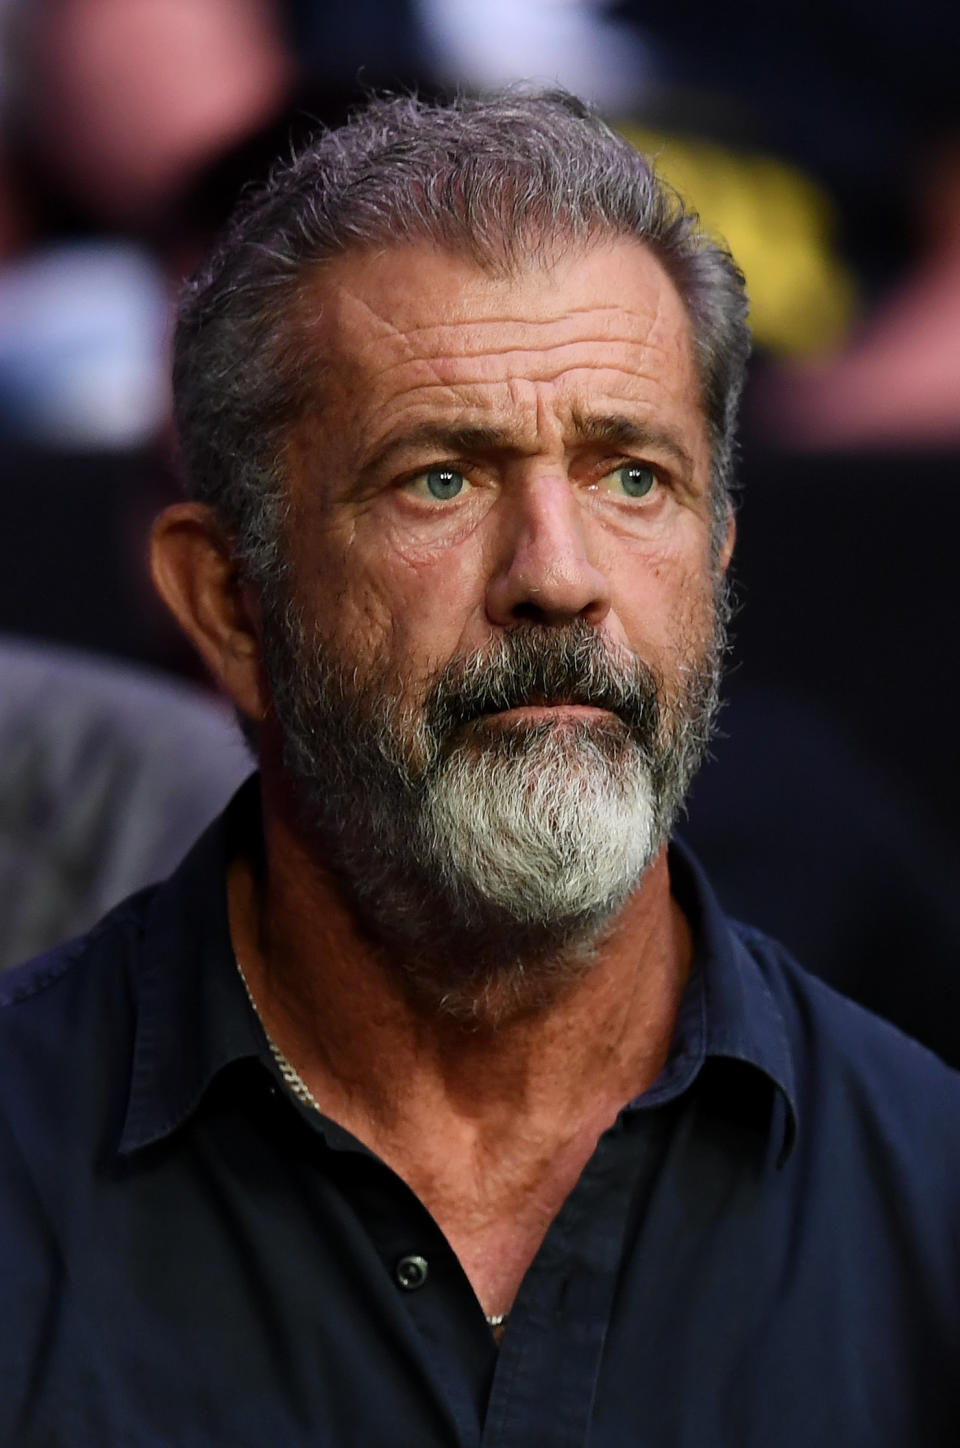 JB: Well, first of all, I love to imagine what it would have been like if either of Mel Gibson's career wrecking moments — the time he got pulled over and said those things about Jewish people or the voicemail for his ex-girlfriend — if either of those happened now, I would love to see that notes app apology. Like what would that look like?But you know, if it were up to me, Mel Gibson would be self-financing independent movies with whichever actors were willing to work with him, not making wacky Christmas movies with Will Ferrell or possibly directing Lethal Weapon 5. But we've known that Mel Gibson has an antisemitic past and said some really, really horrible, disturbing things to his ex. We can't relearn that information for the first time. So because of the weird, fluctuating statute of limitations we have, it’s all now personal decisions. It's executives who decide to greenlight his movies and the actors who decide to appear in them, and then whether we go see them or not.